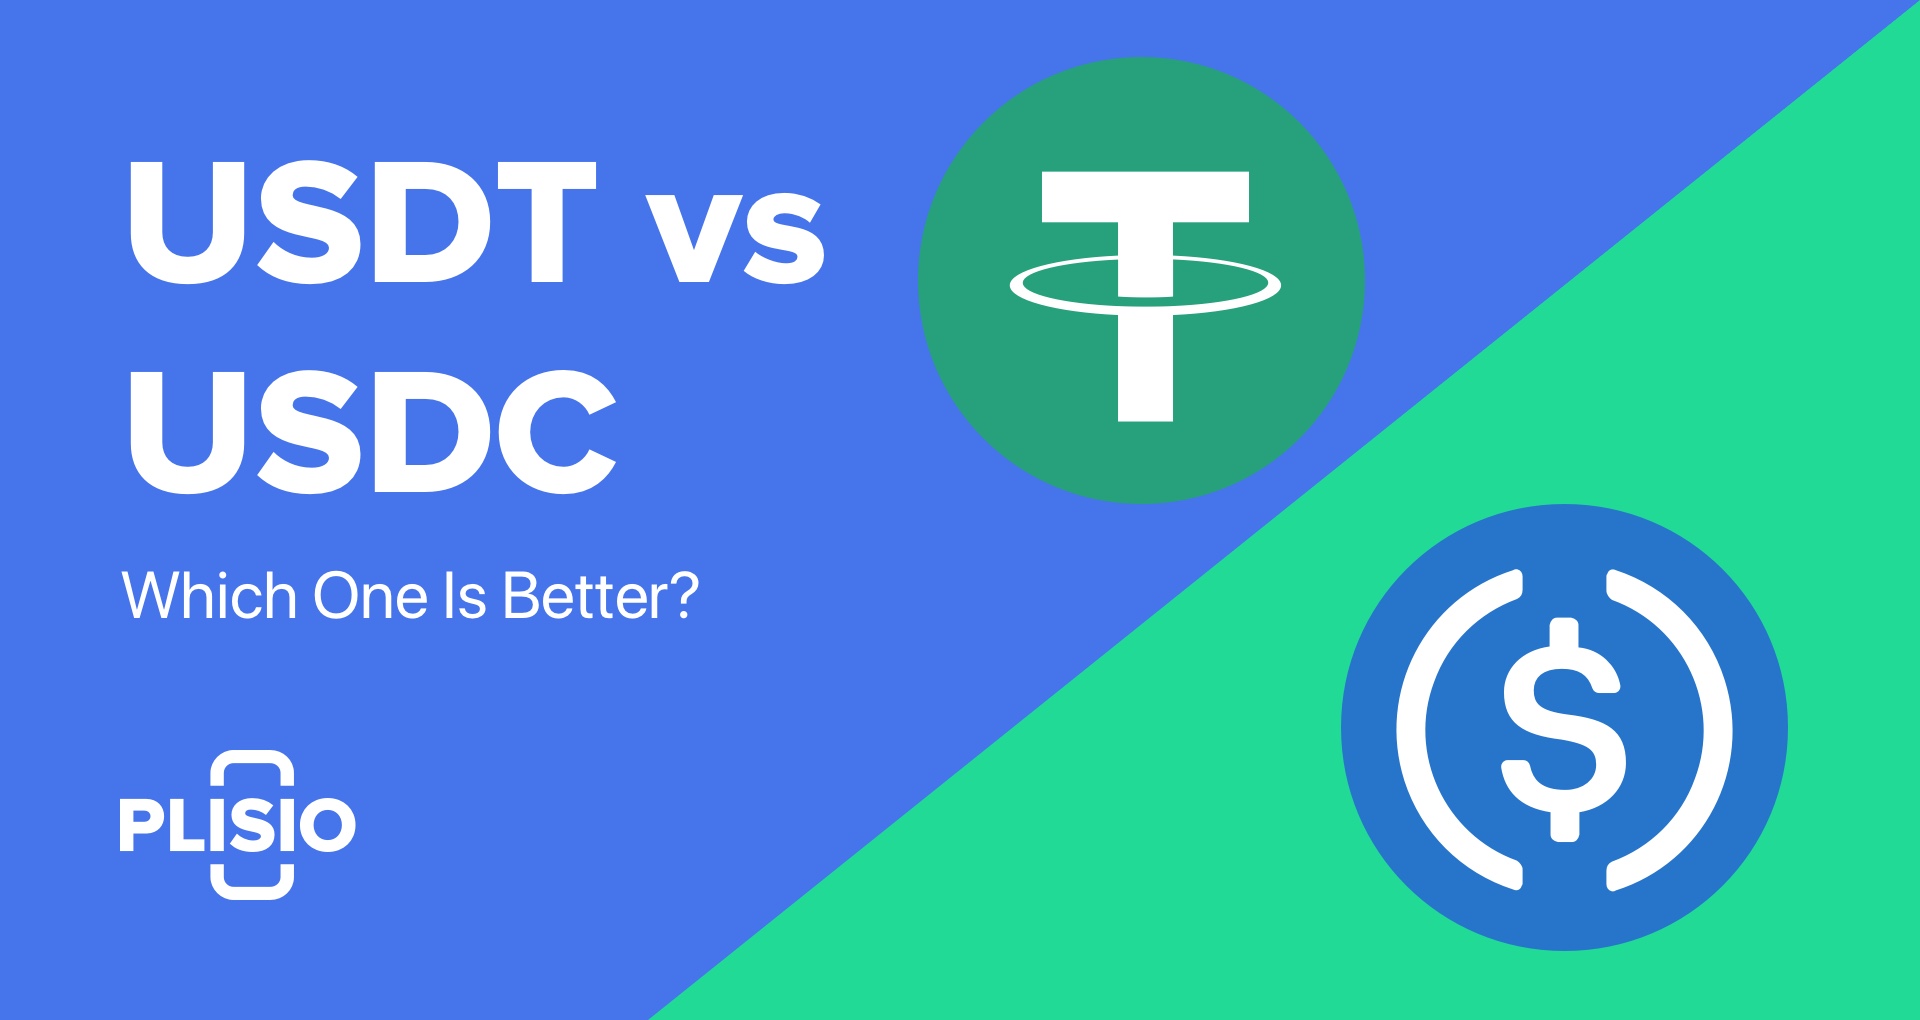 USDT vs USDC: Which One Is Better?